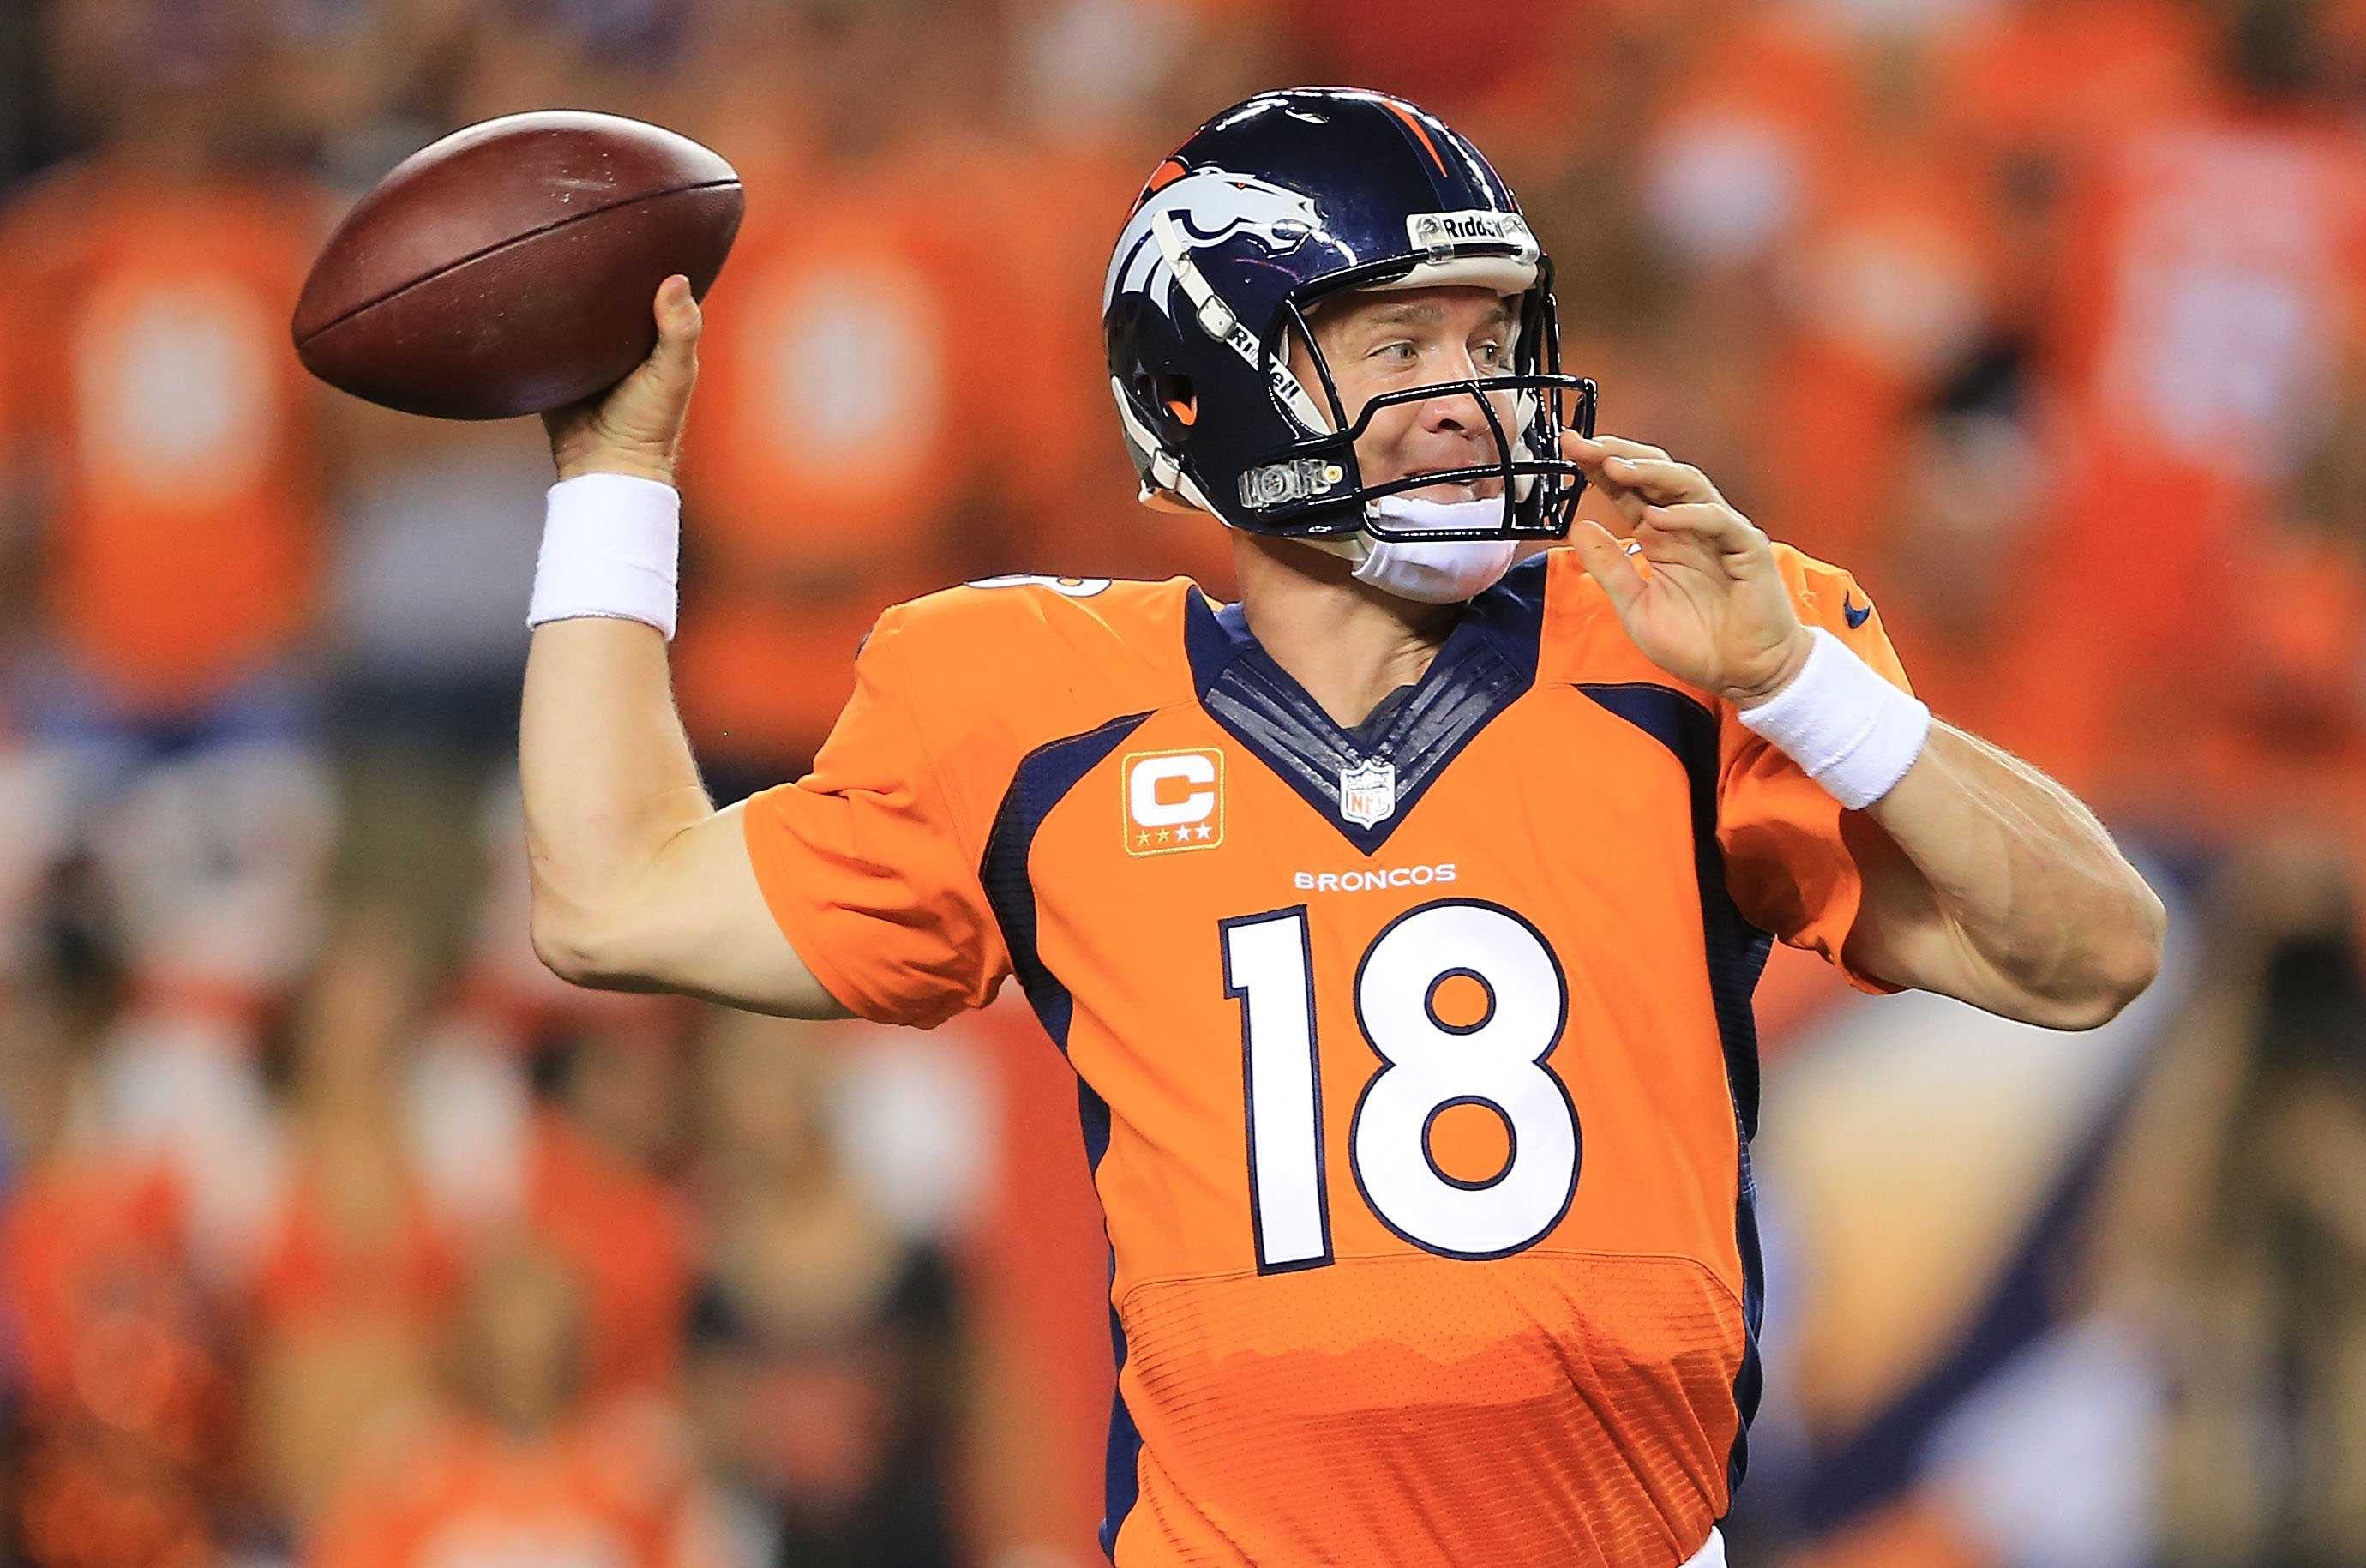 Peyton Manning’s Passing Yards Record Will Stand AE Sports